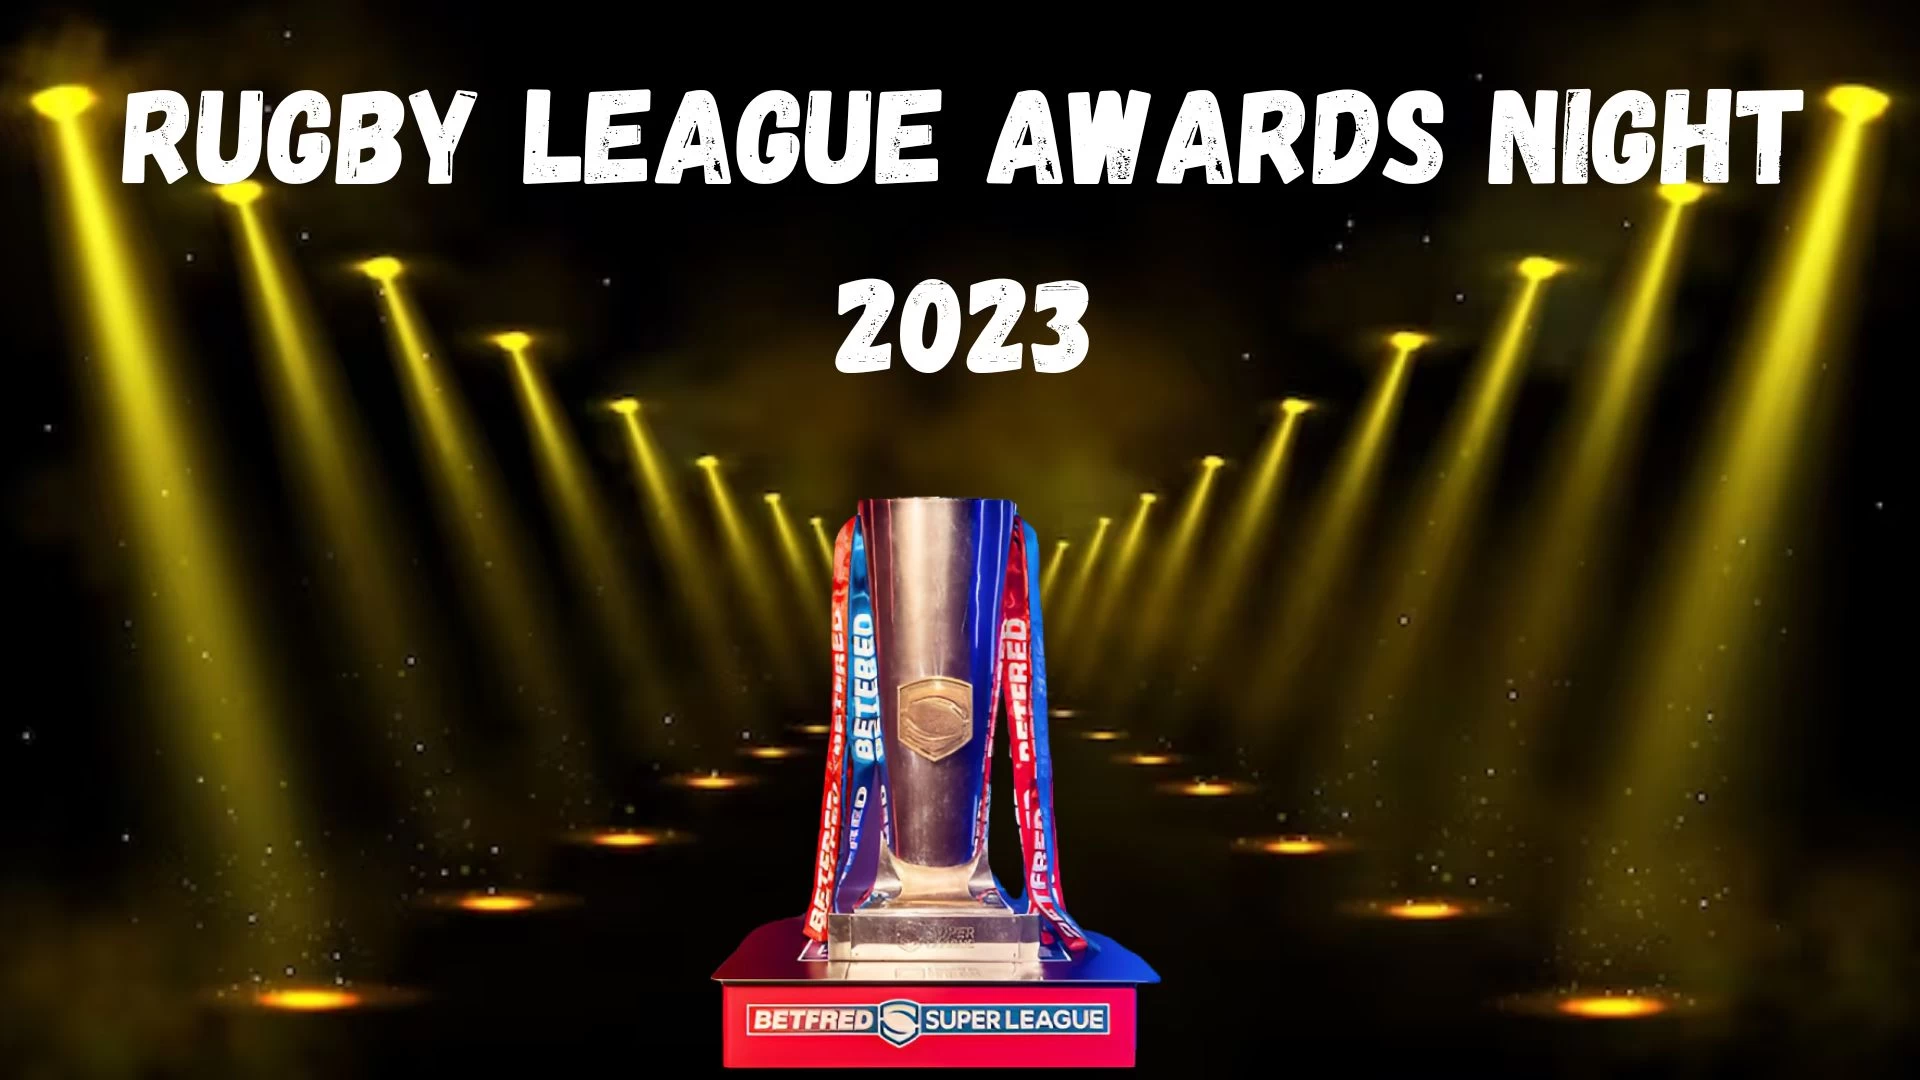 Rugby League Awards Night 2023, Rugby League Awards Winners List